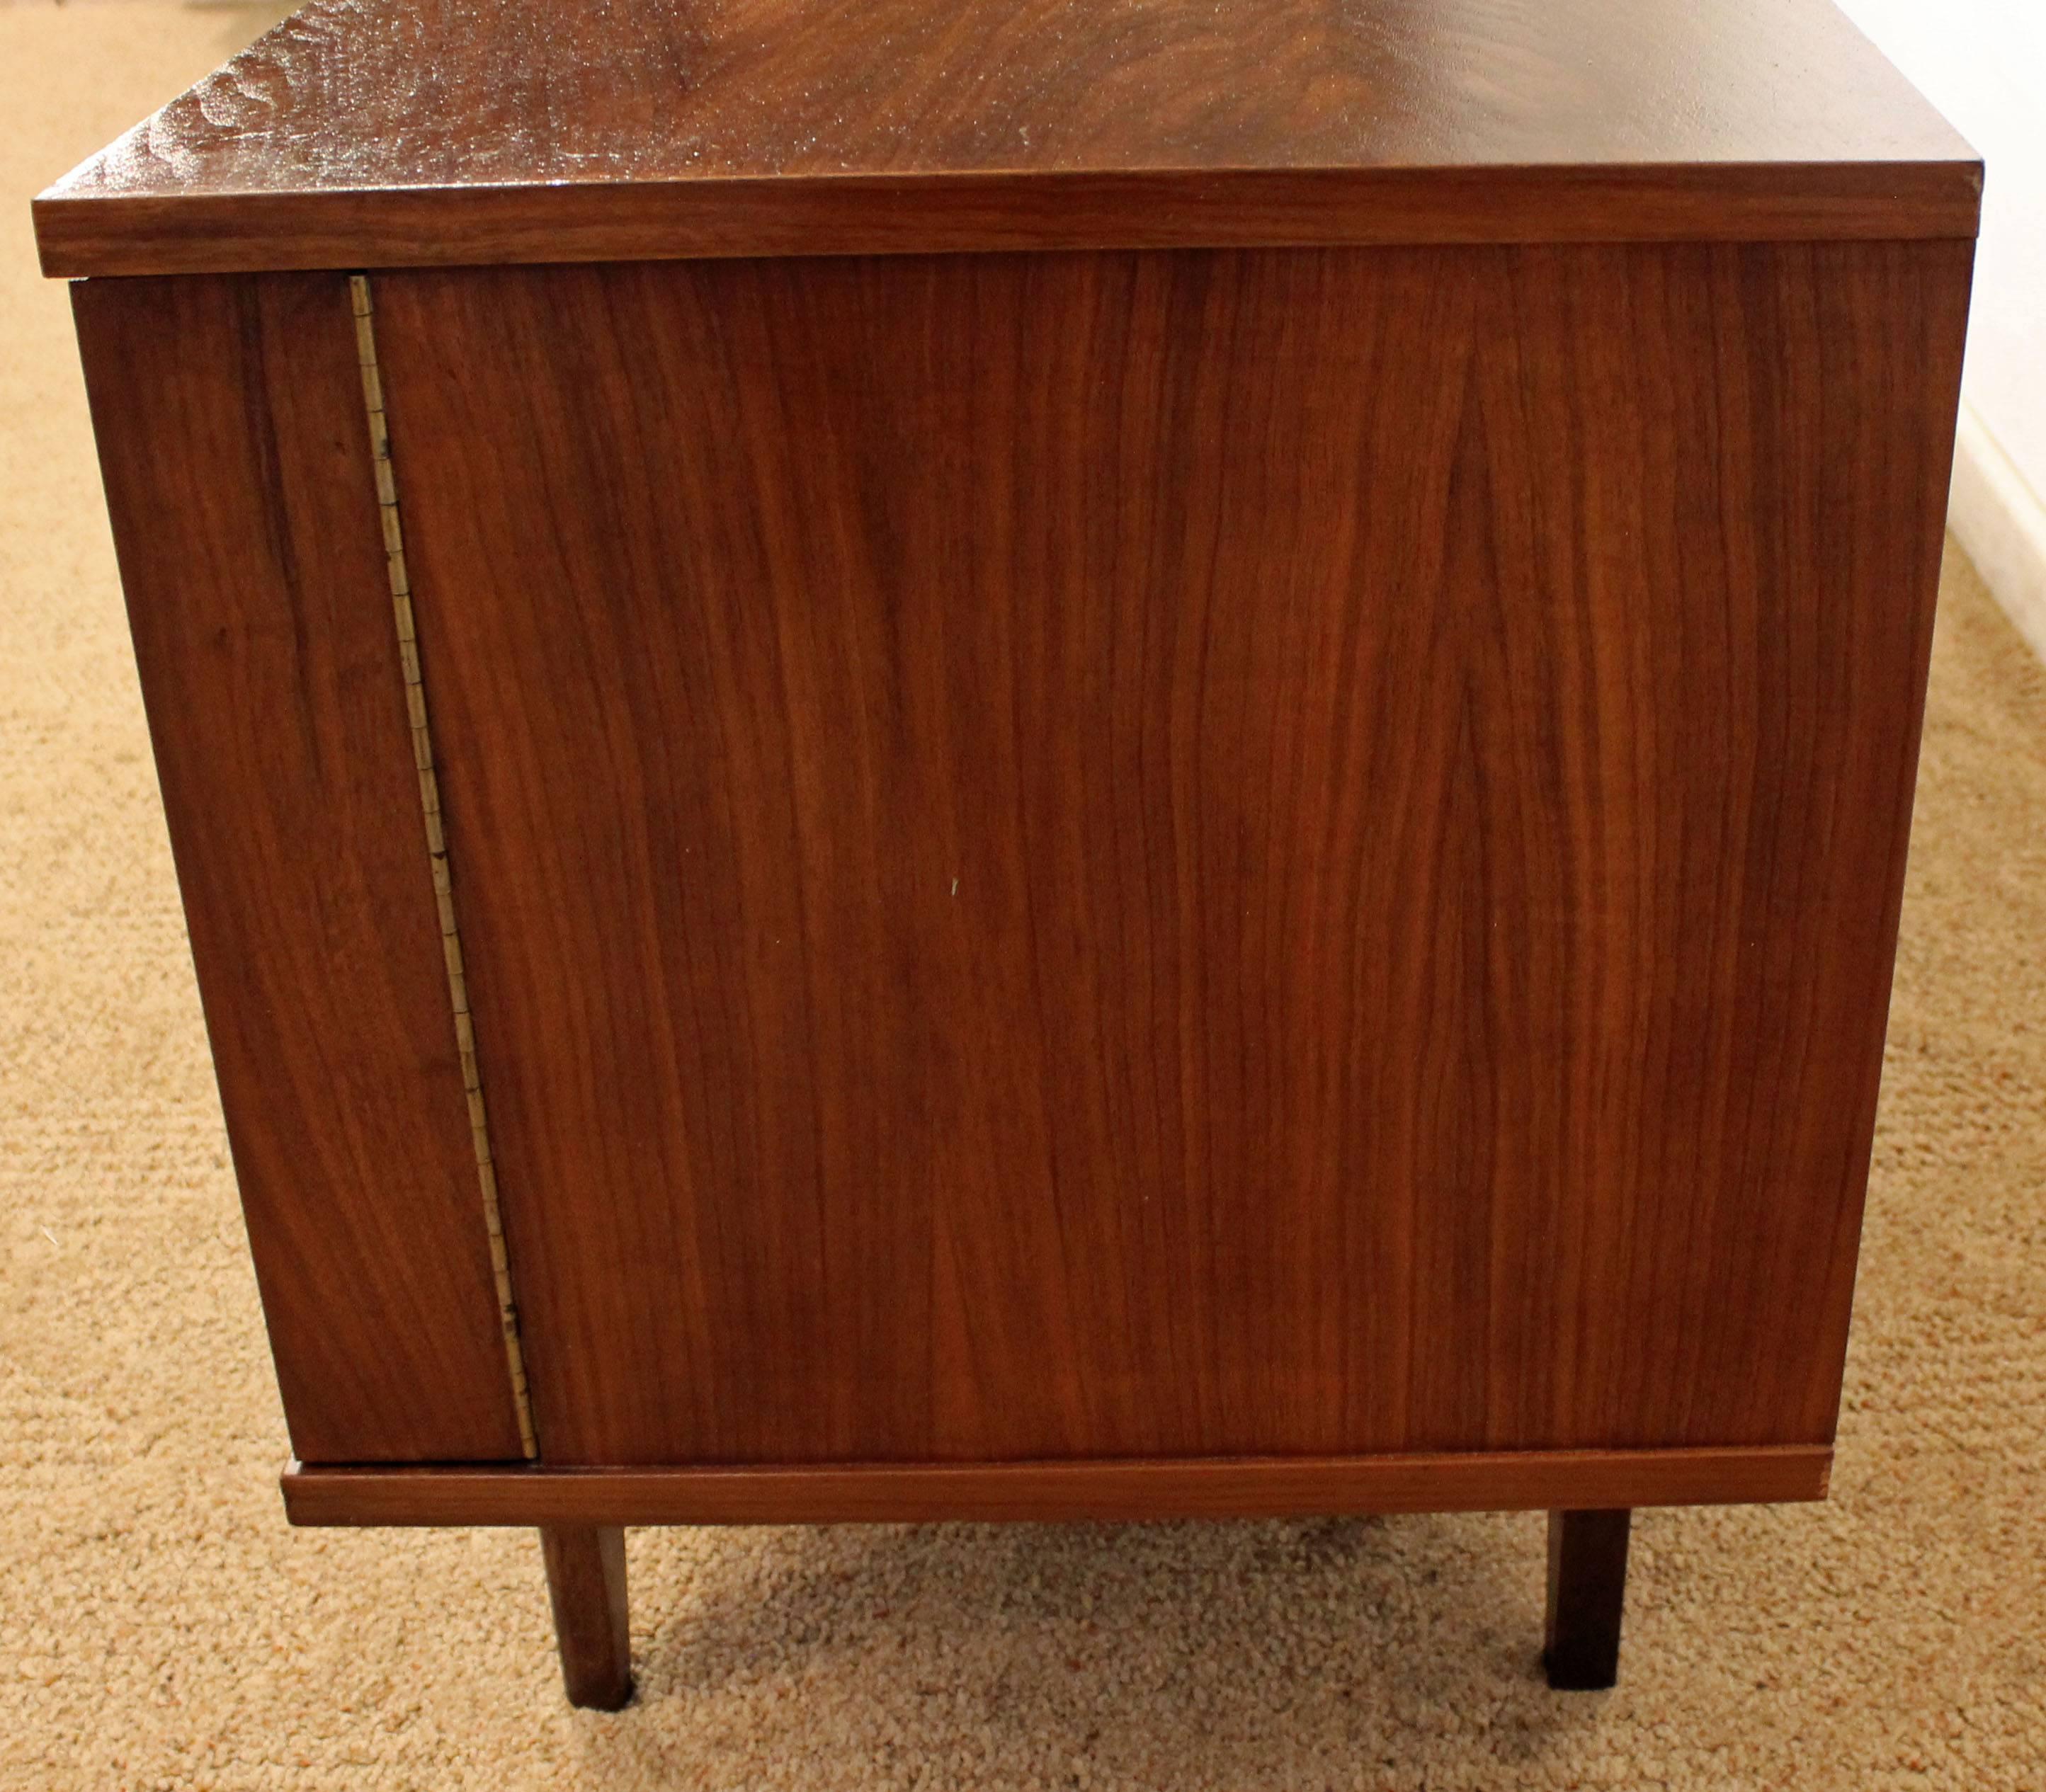 Mid-Century Modern Elongated Low Concave-Front Walnut Credenza 1